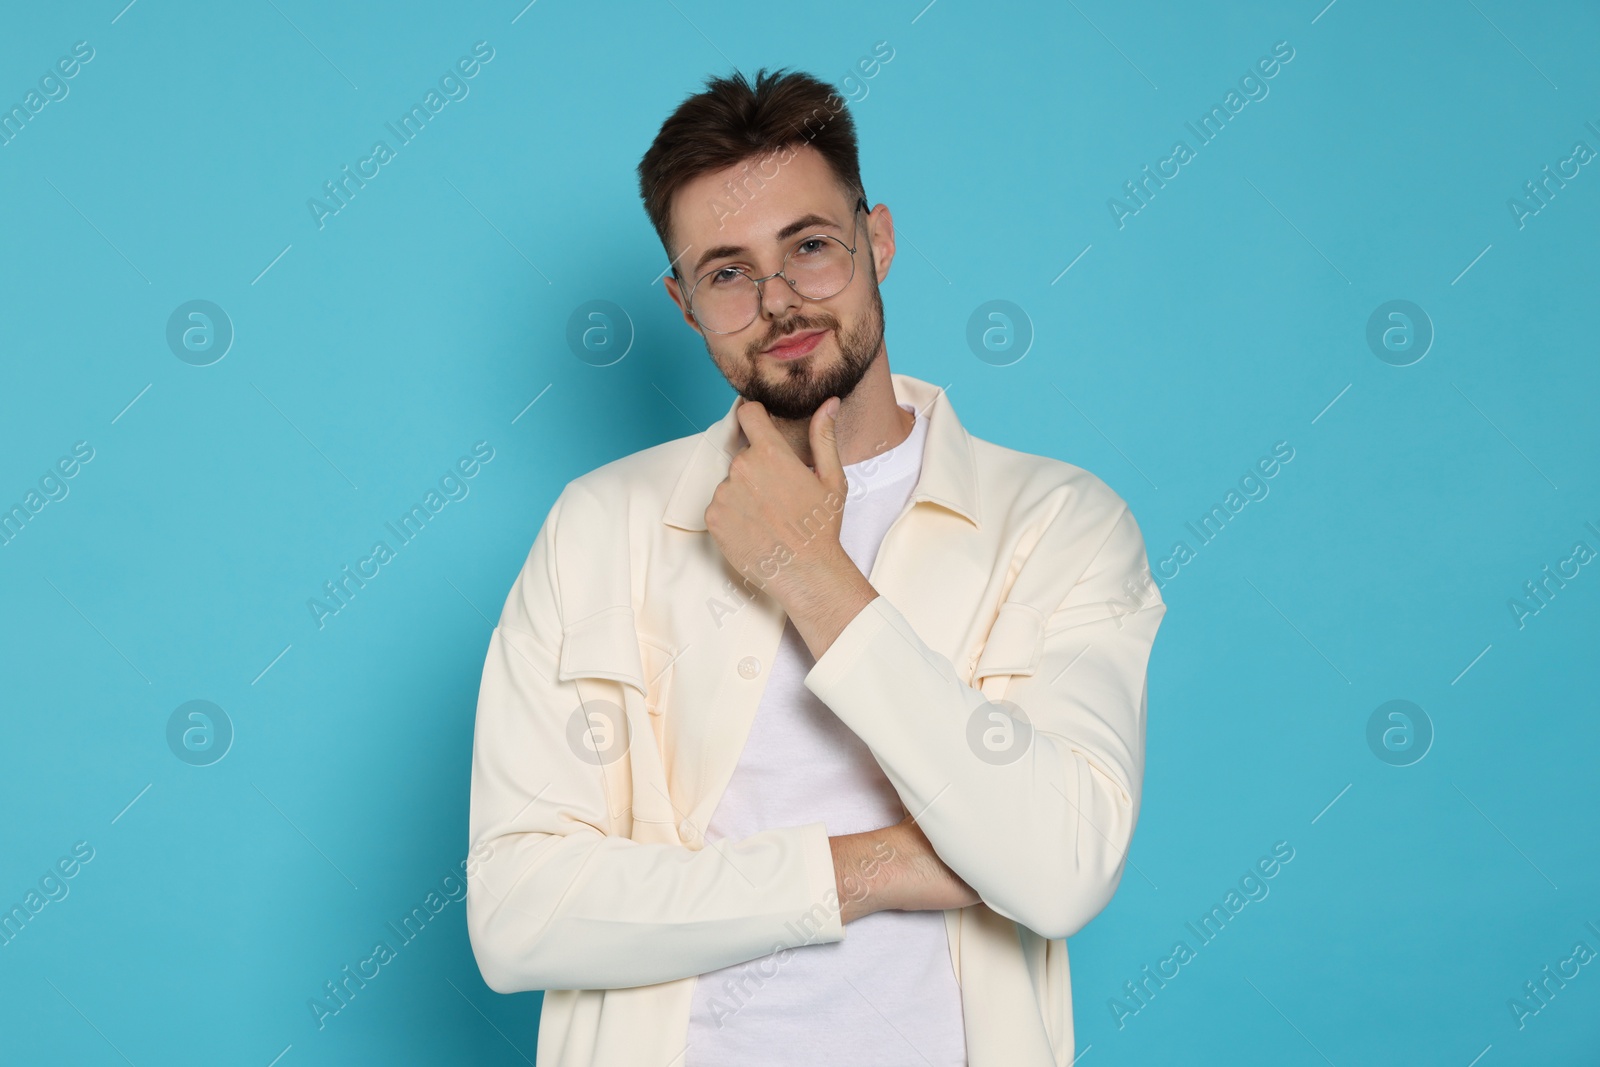 Photo of Handsome man in white jacket and eyeglasses with on light blue background